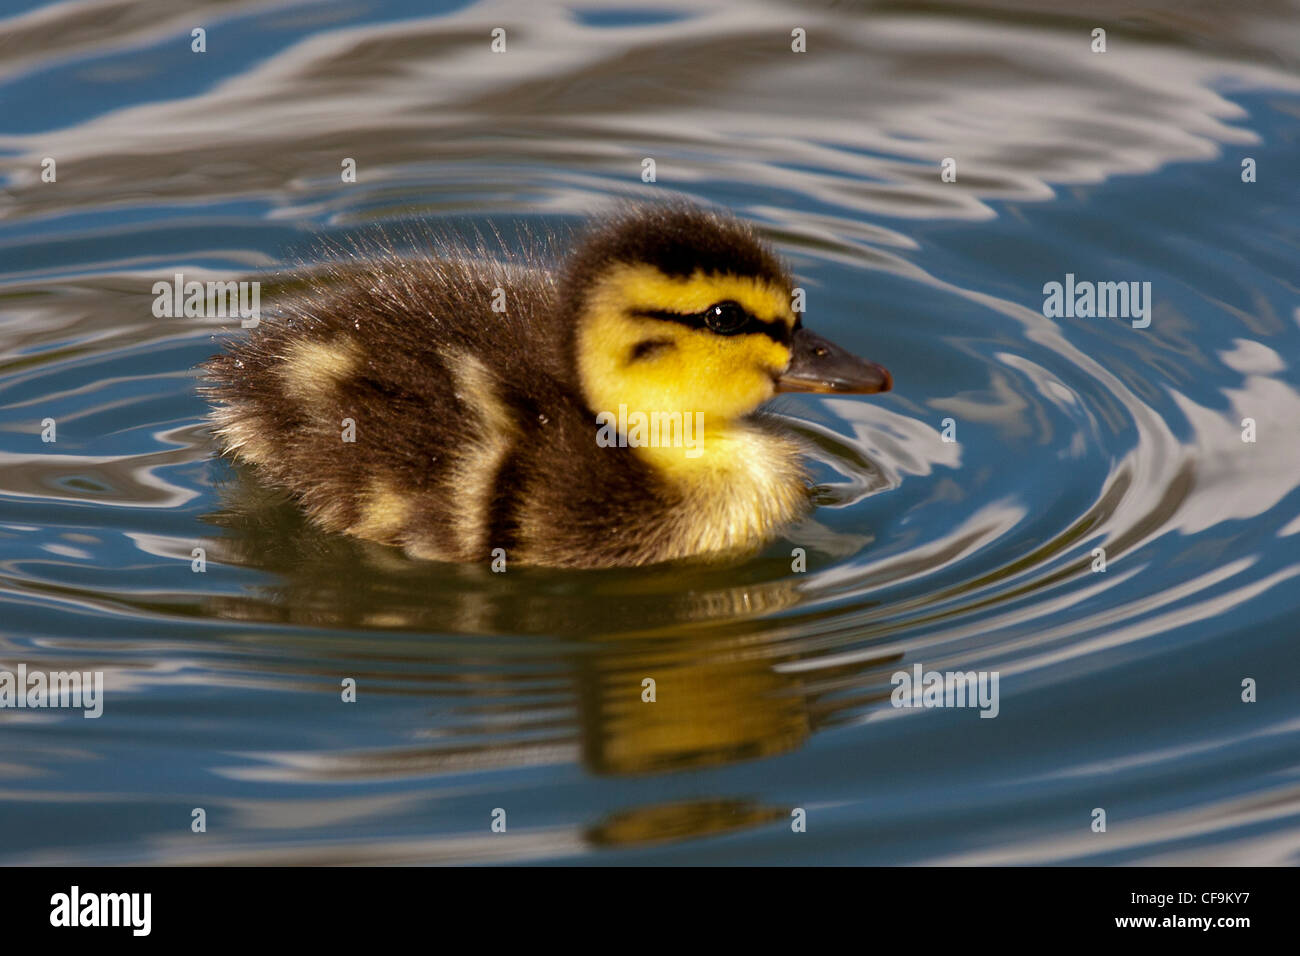 A cute duckling creating ripples in local pond (Battersea Park - London). Stock Photo